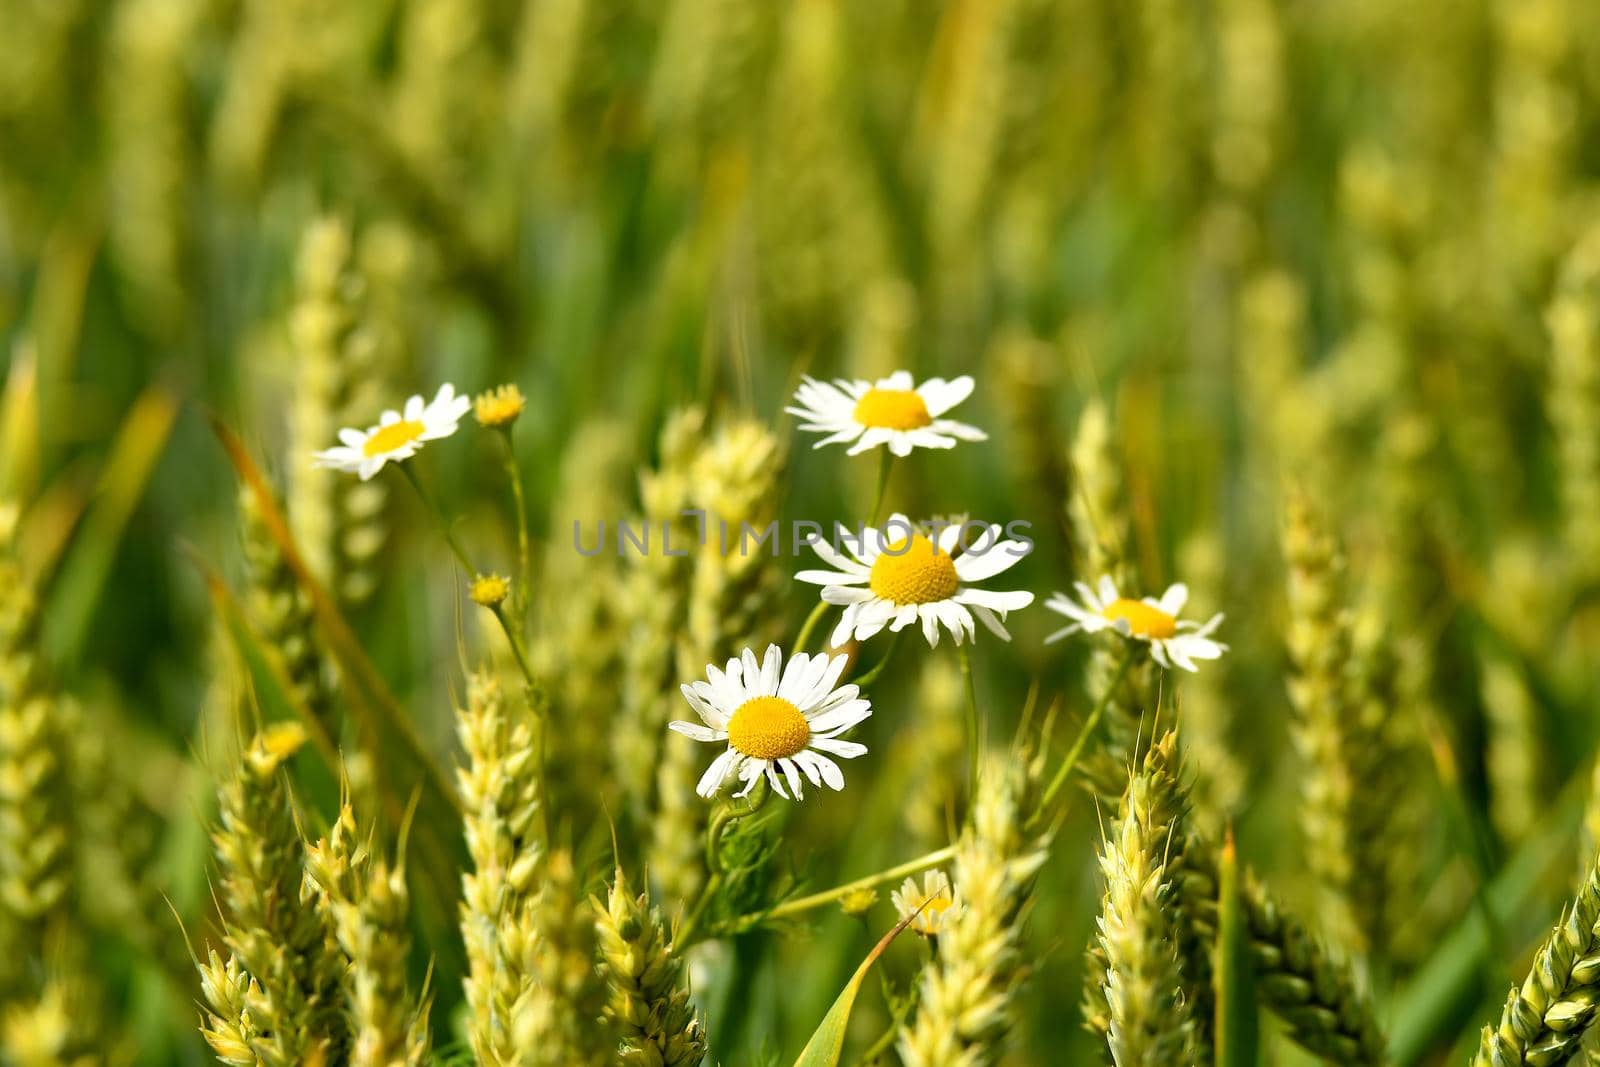 Chamomile at a field of wheat in Germany